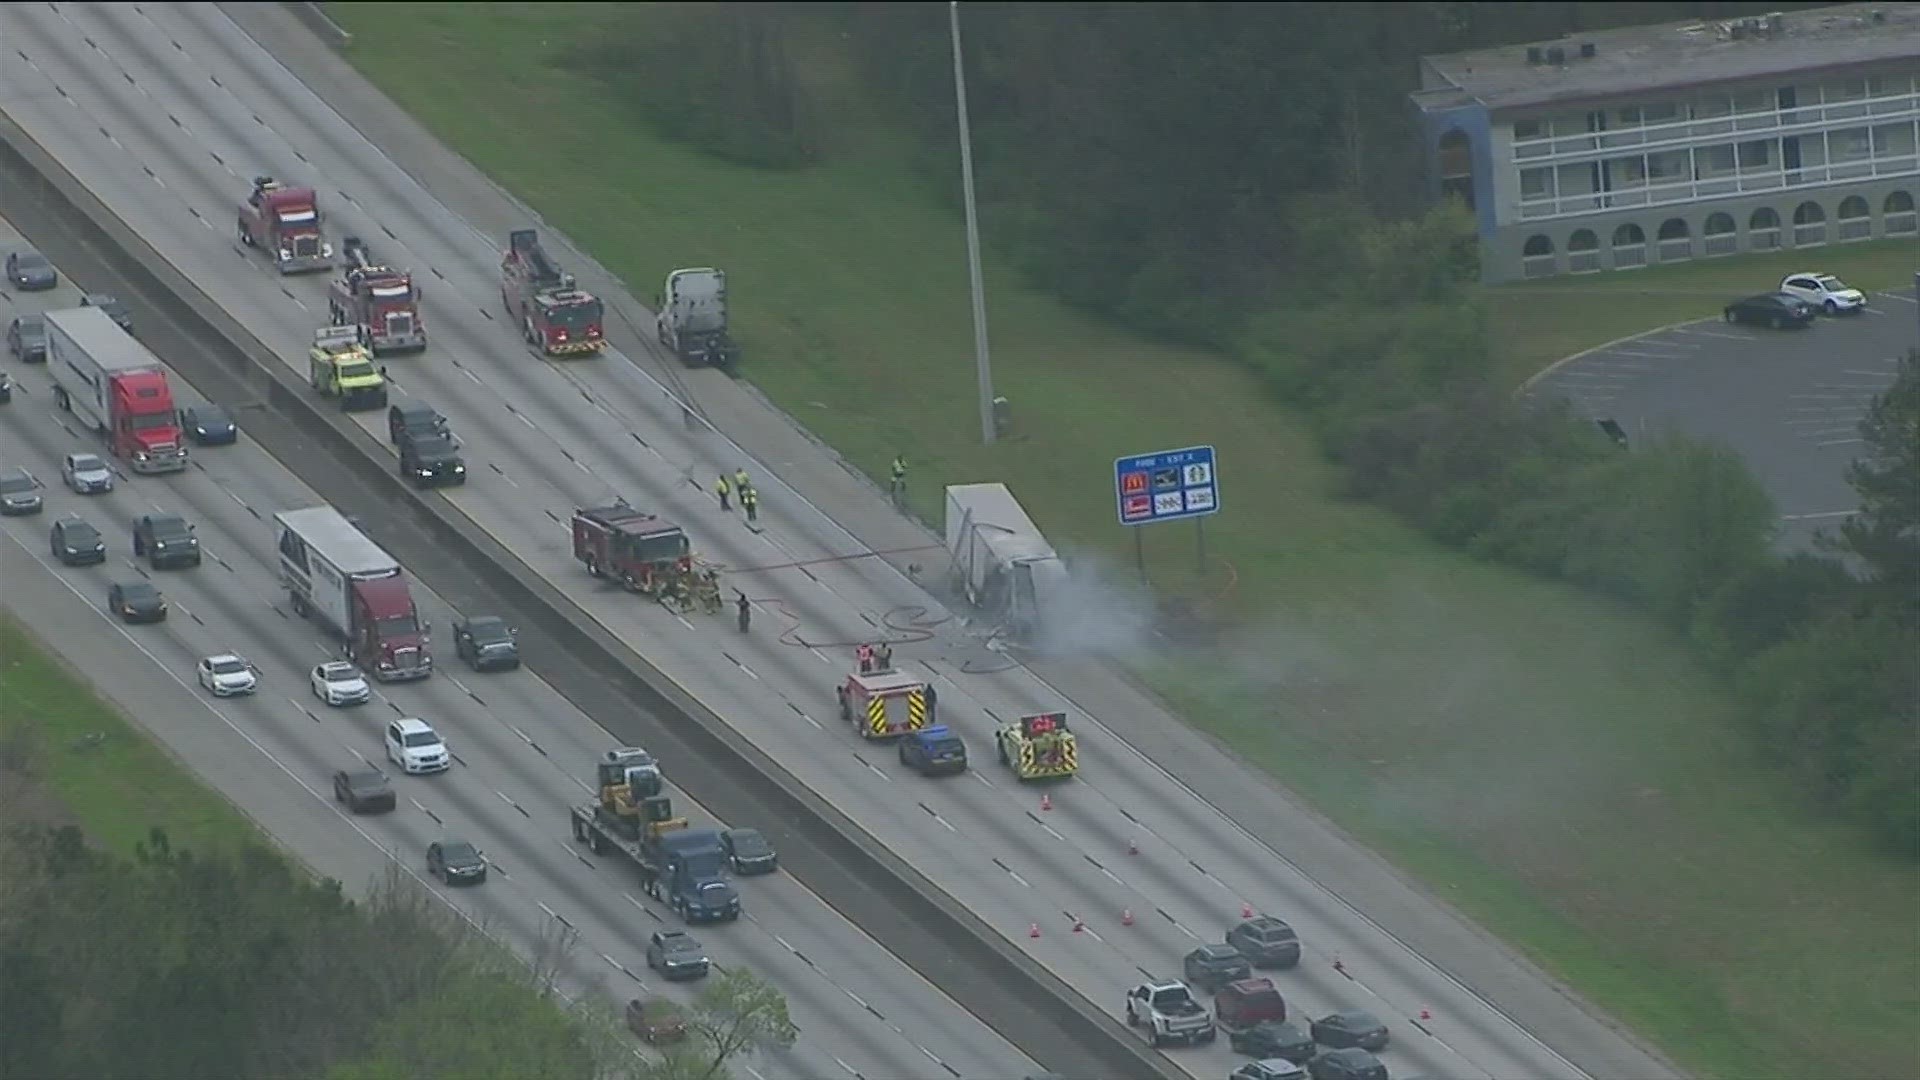 All lanes are blocked on I -285 South down near the airport with two tractor-trailer fires causing a full shutdown.